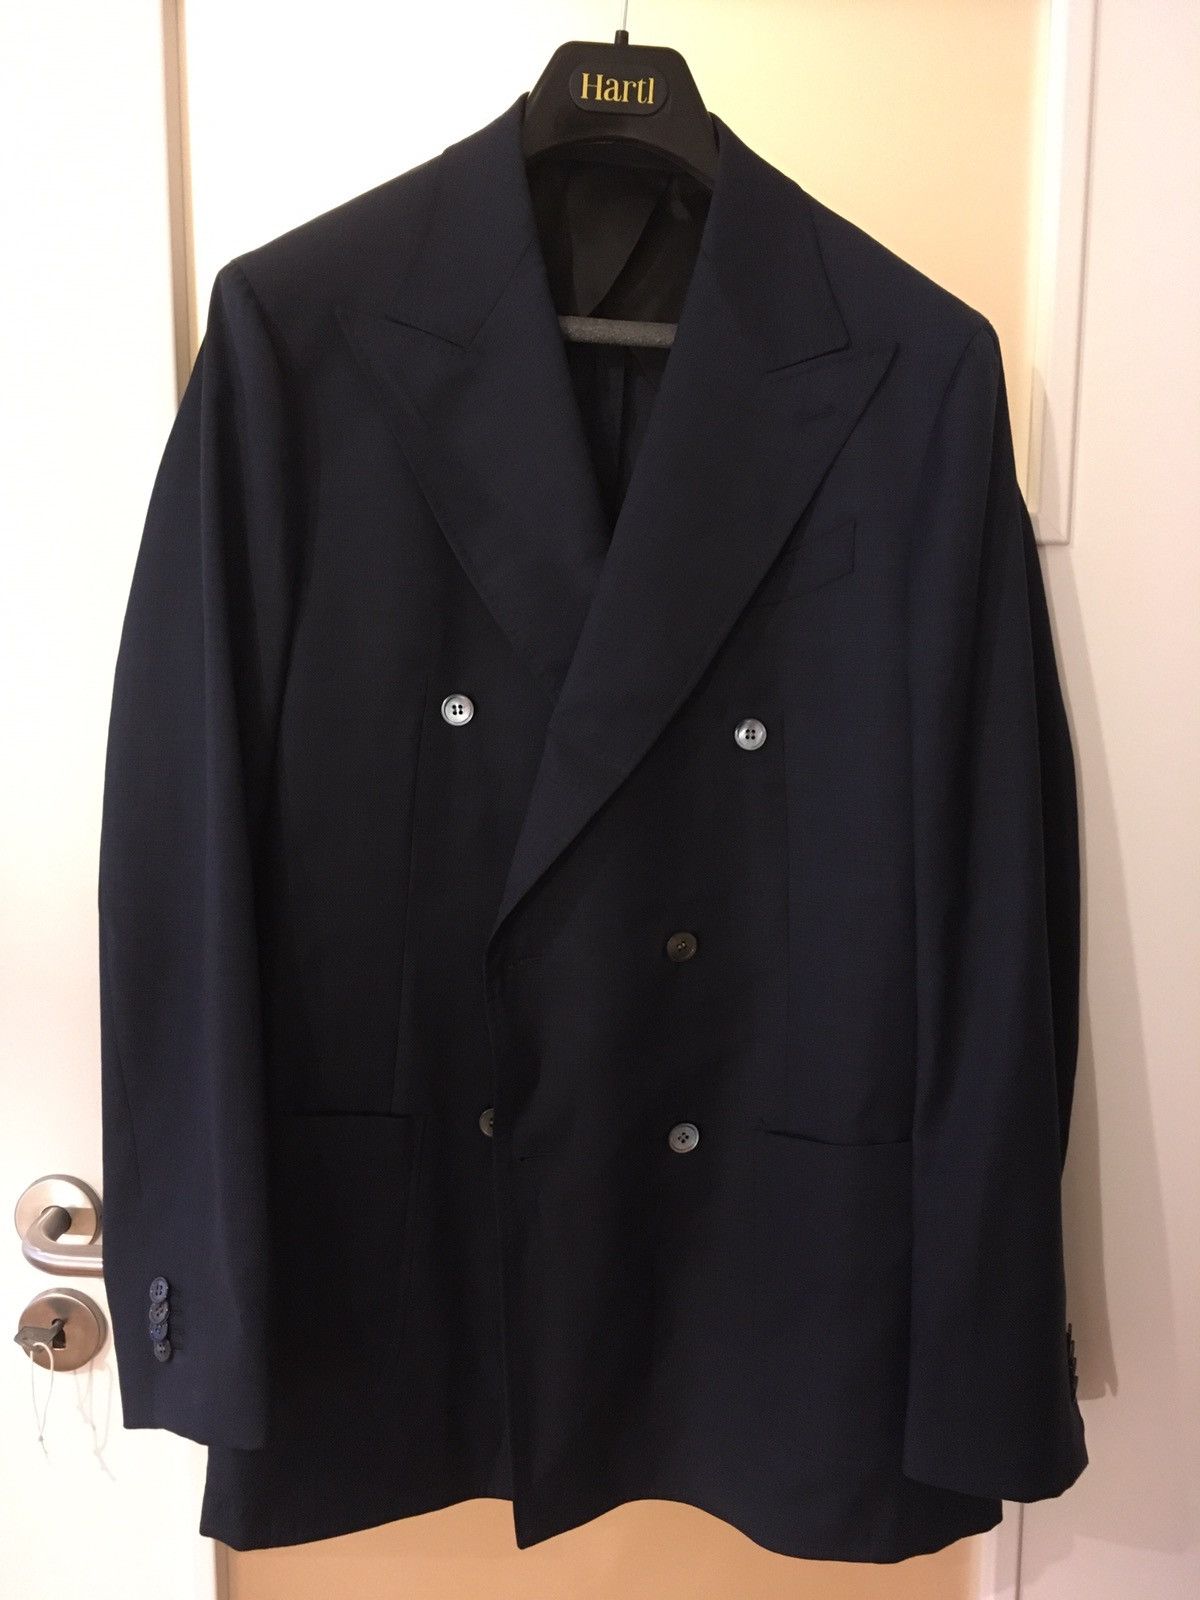 Spier And Mackay Navy blue double breasted sports coat | Grailed